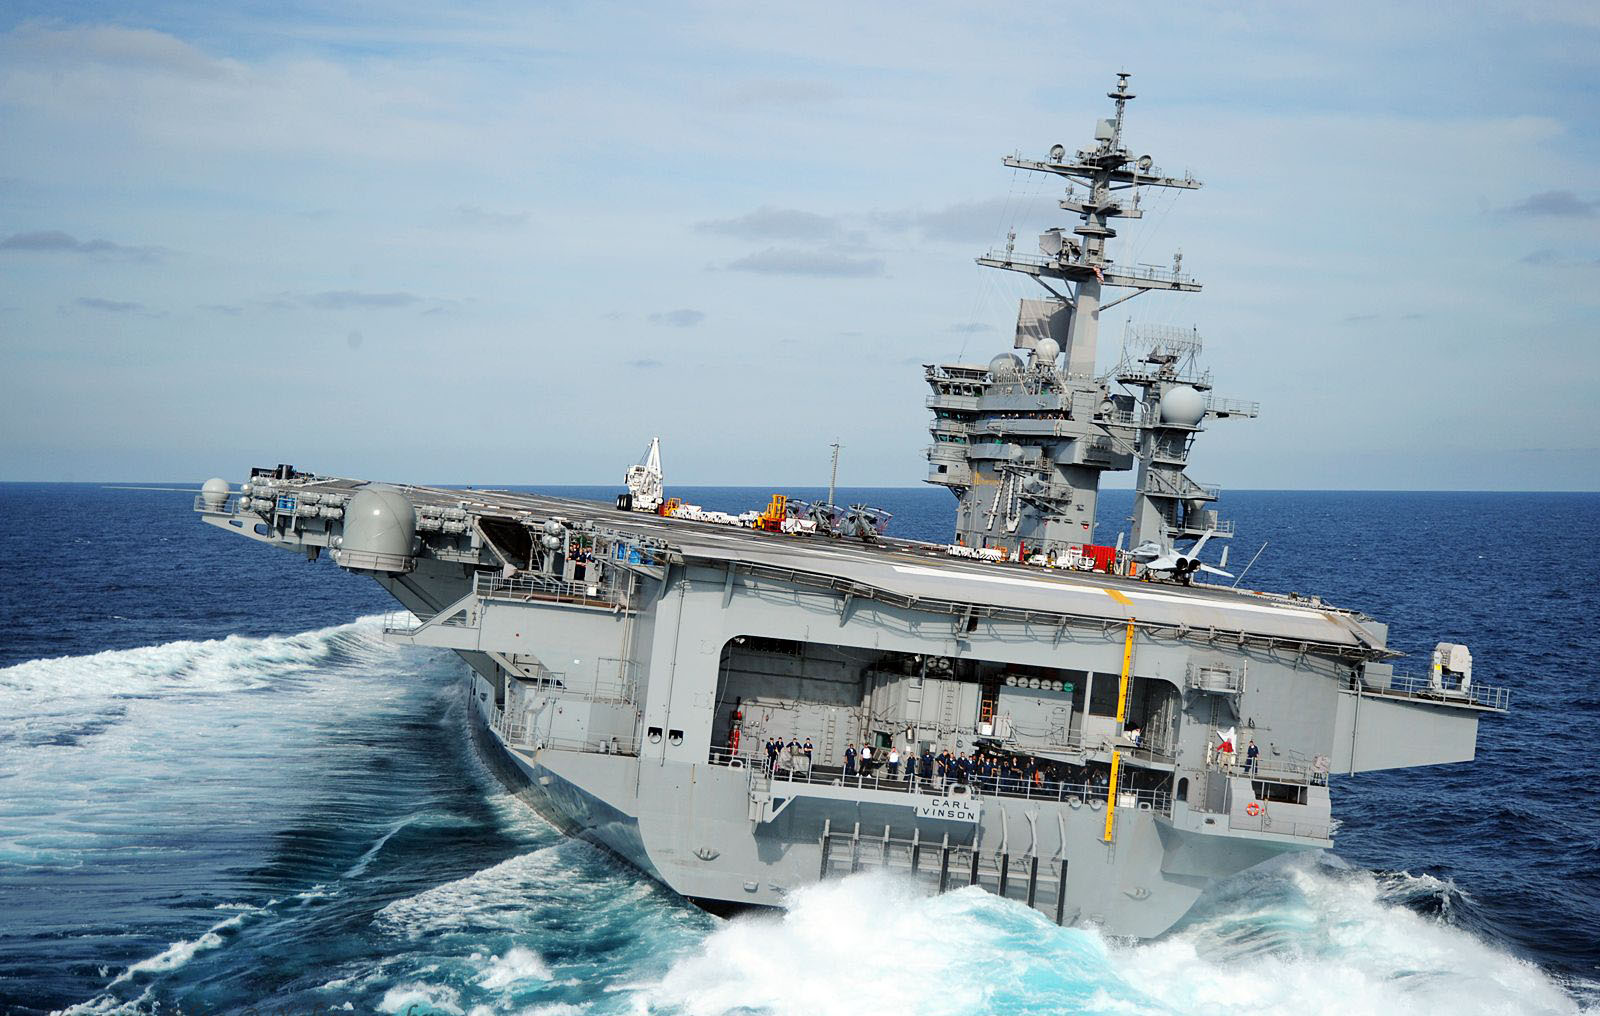 A majestic aircraft carrier, a powerful warship sailing on the calm ocean.